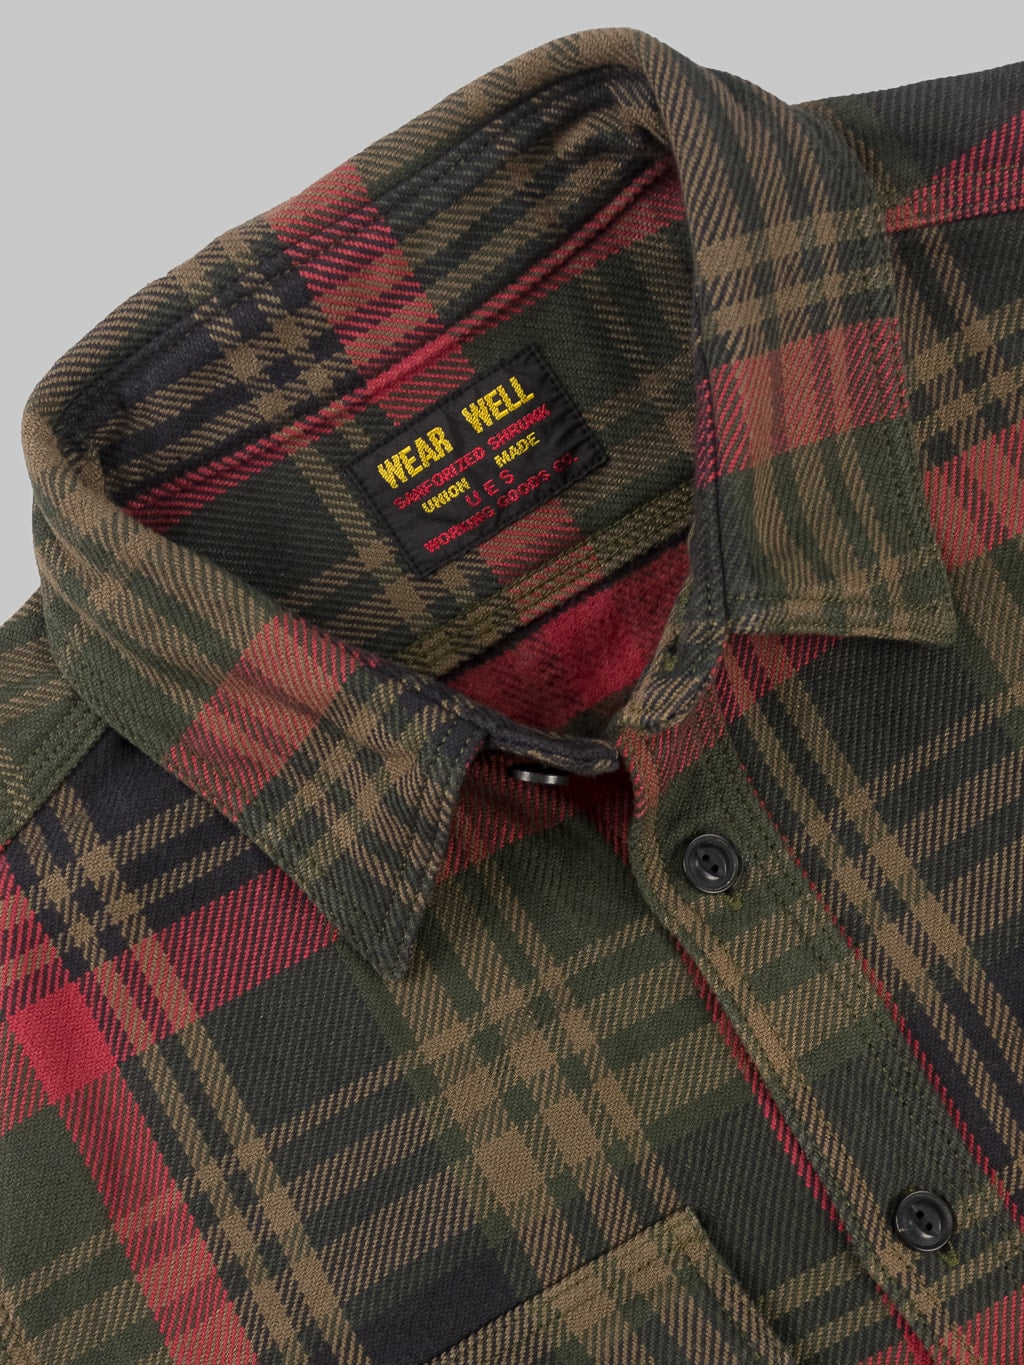 ues extra heavy selvedge flannel shirt red  collar closeup